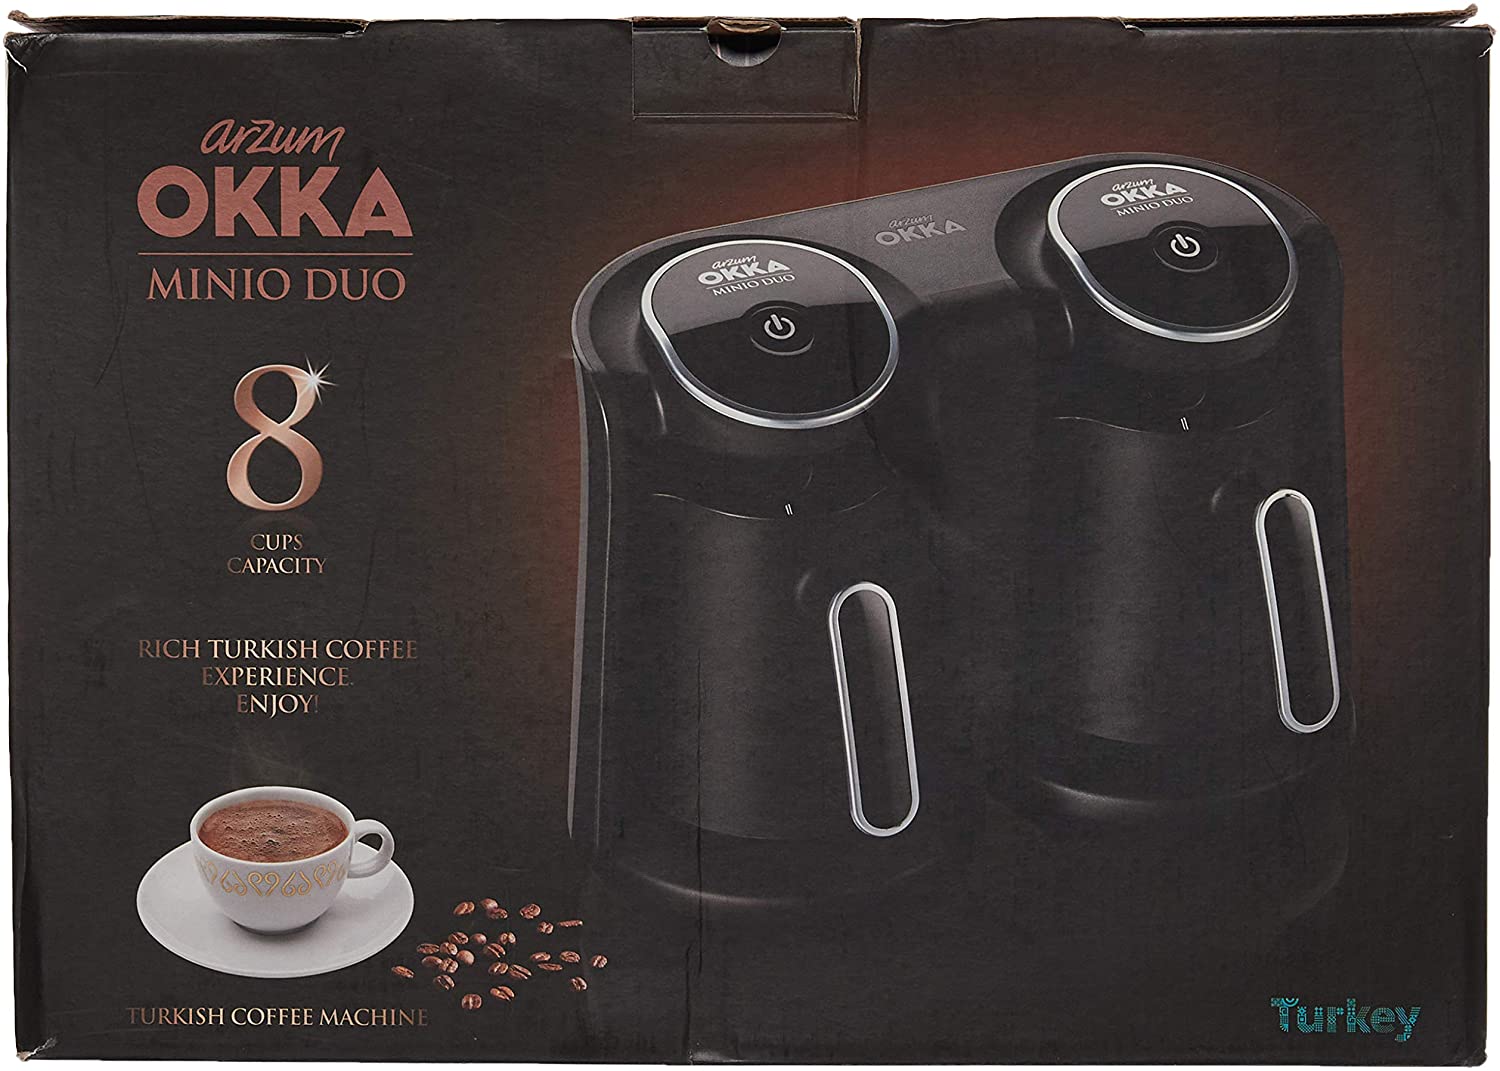 Arzum OKKA Minio Duo Coffee Maker, OK006-K, 1-8 Cup Capacity, Washable Coffee Pot, Acoustic Alarm System, Compact Construction, 880 W Power, Coffee Measuring Spoon